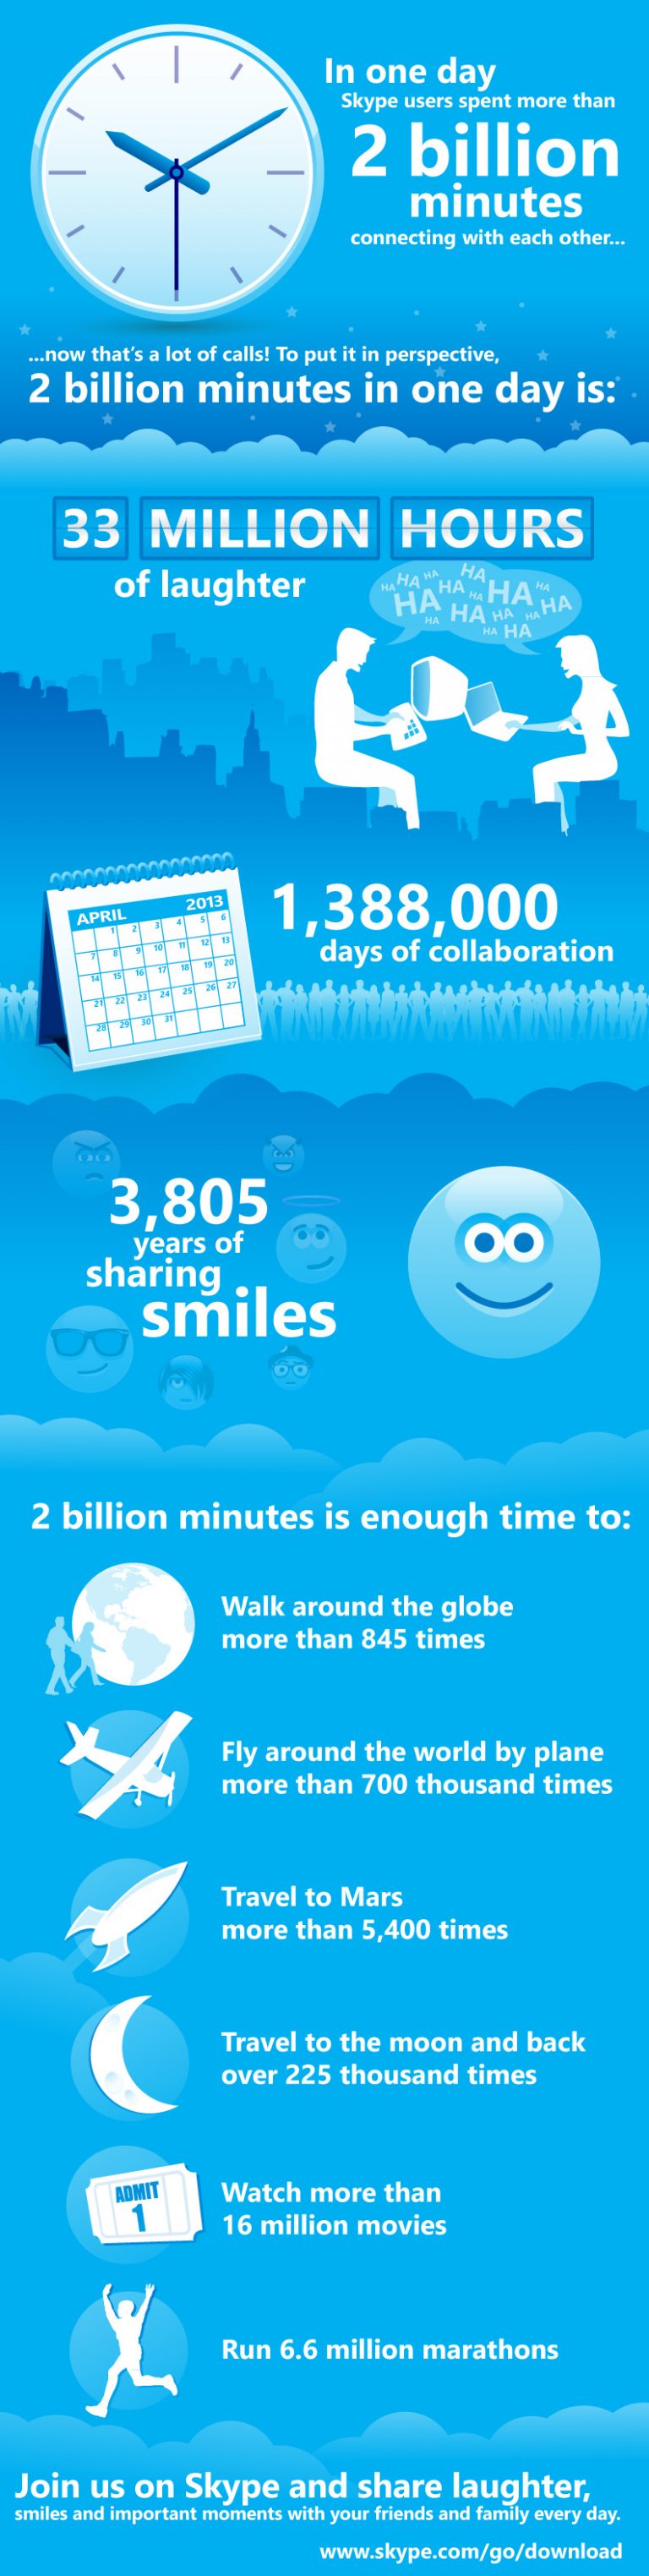 Skype users connect for 2 billion minutes in one day